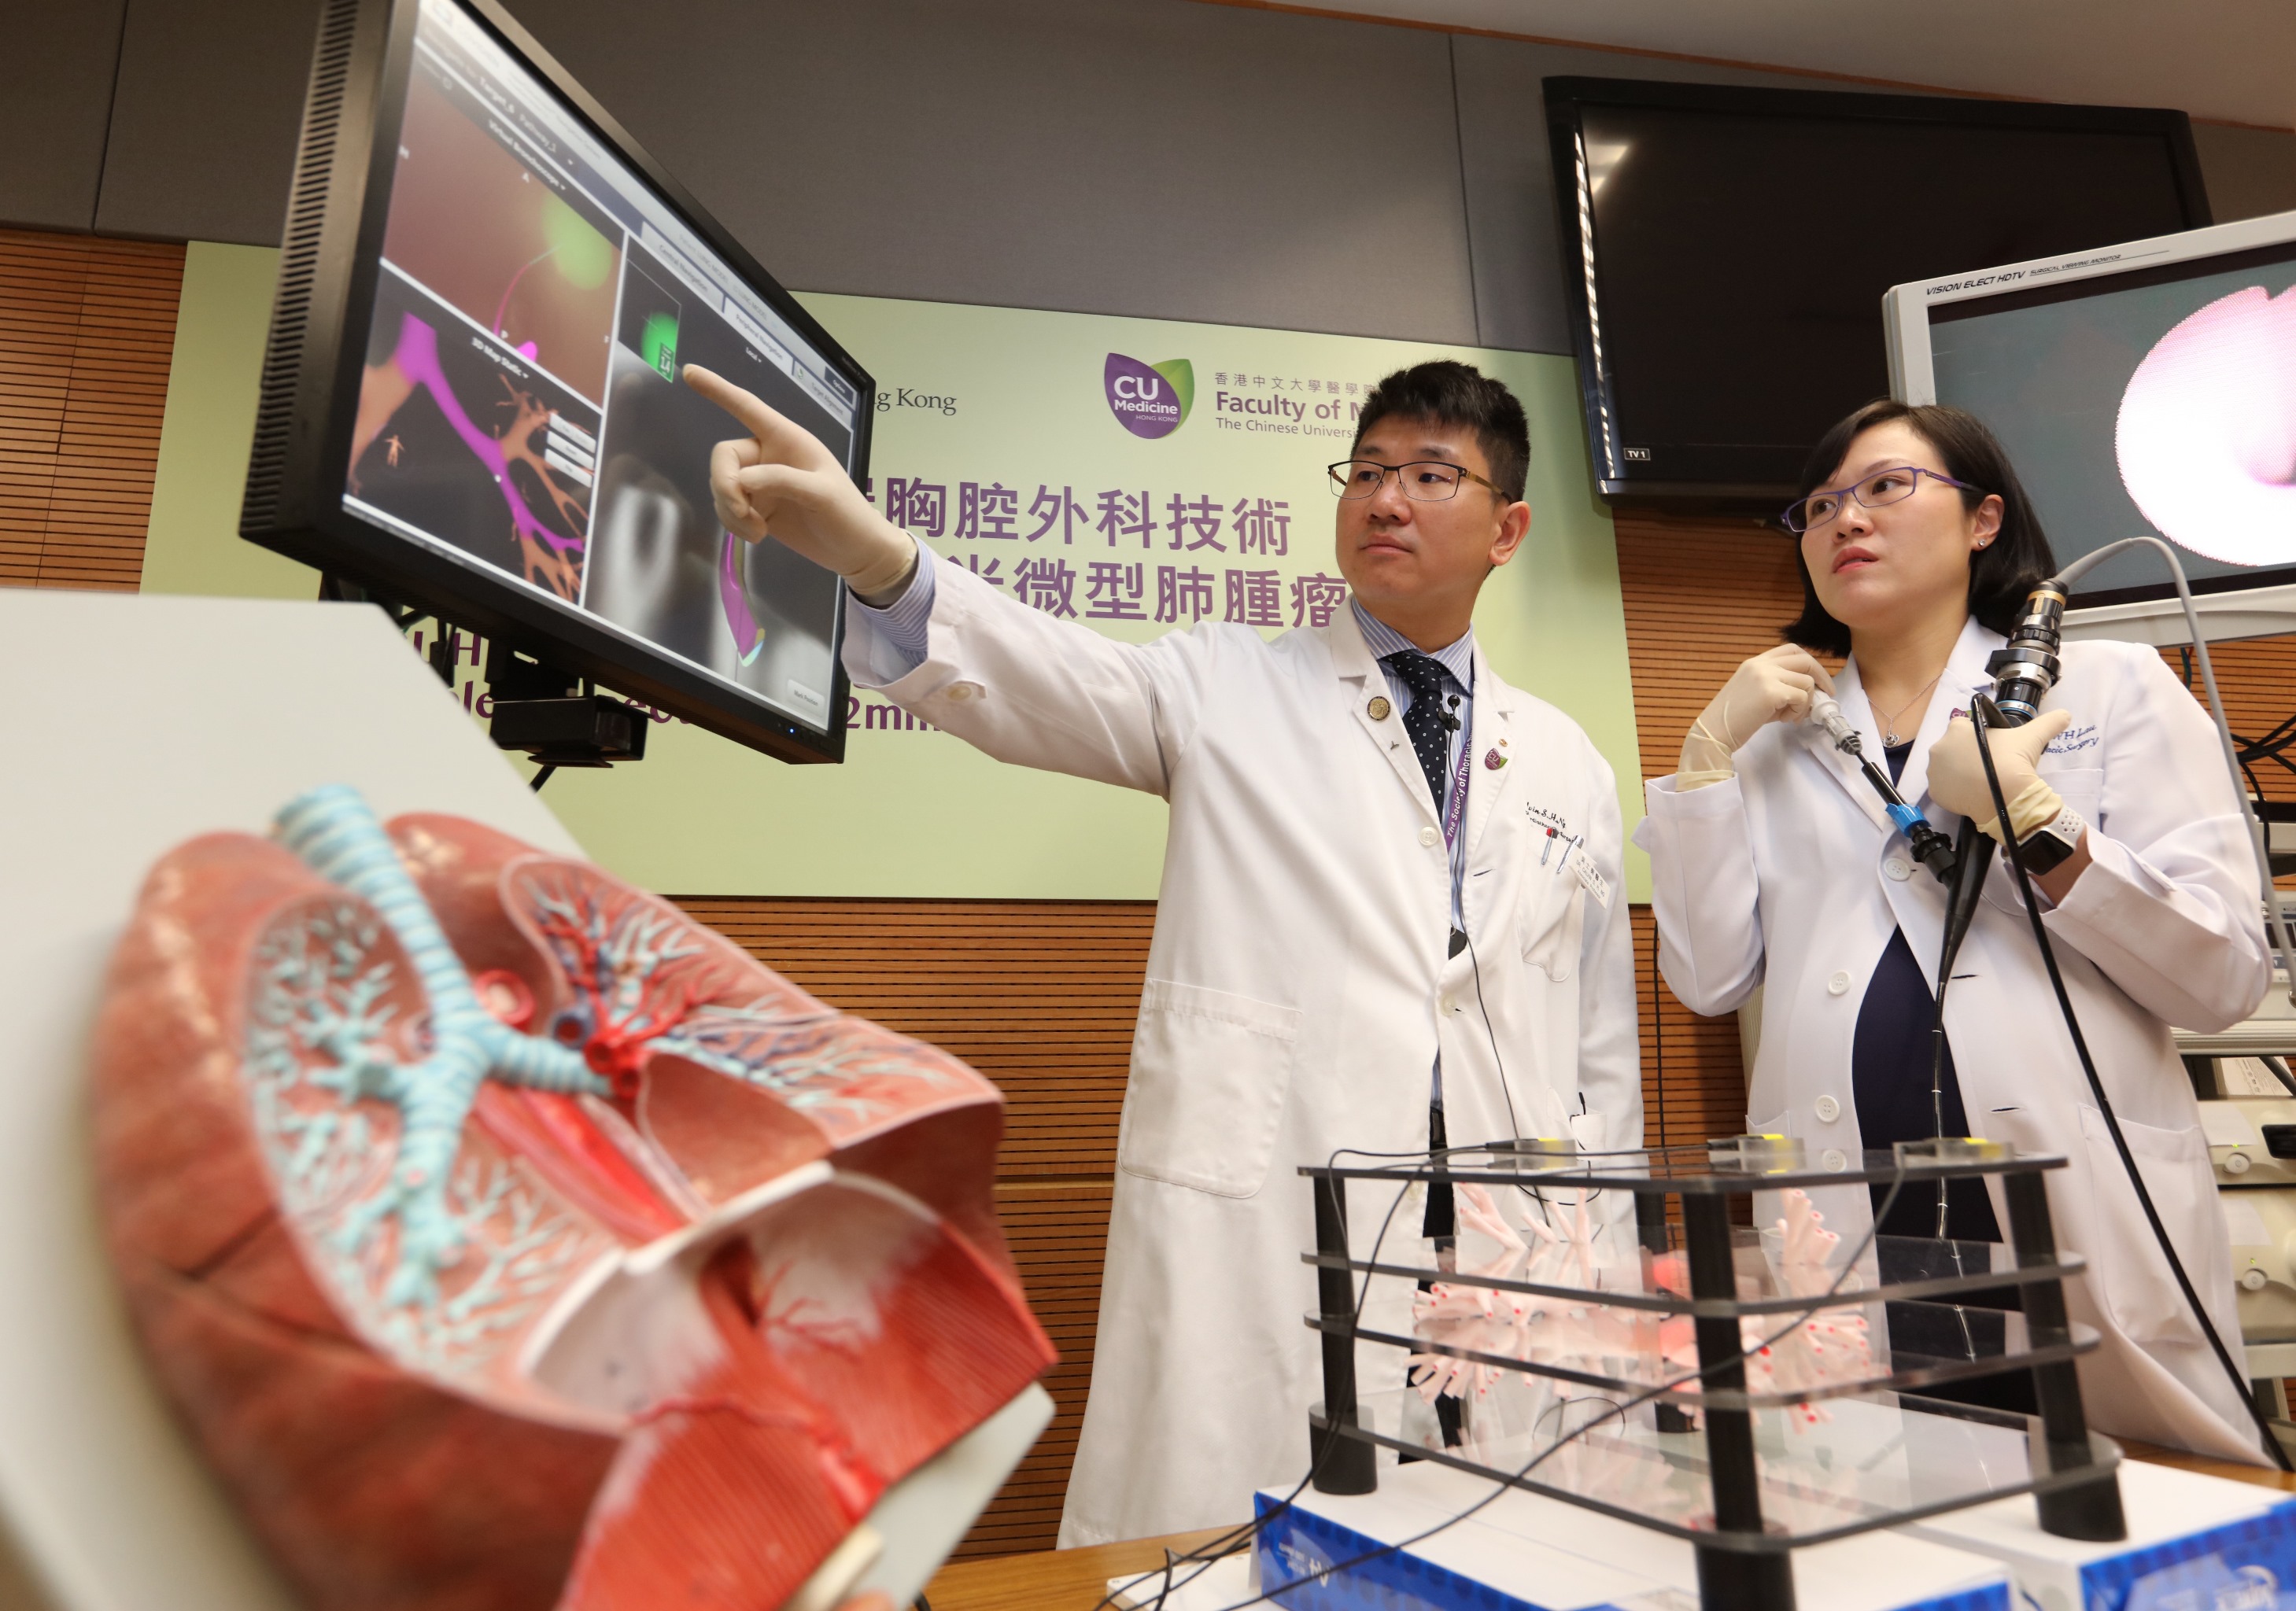 The Faculty of Medicine at CUHK combines the use of Electromagnetic Navigation Bronchoscopy (ENB) with Hybrid Operating Room to allow real-time imaging for surgical localisation and for biopsy of micro pulmonary lesions, some as small as 2mm in diameter. (From left) Dr. Calvin Sze Hang NG, Associate Professor, Division of Cardiothoracic Surgery, Department of Surgery, Faculty of Medicine, CUHK and Dr. Rainbow Wing Hung LAU, Clinical Assistant Professor (honorary) from the same division